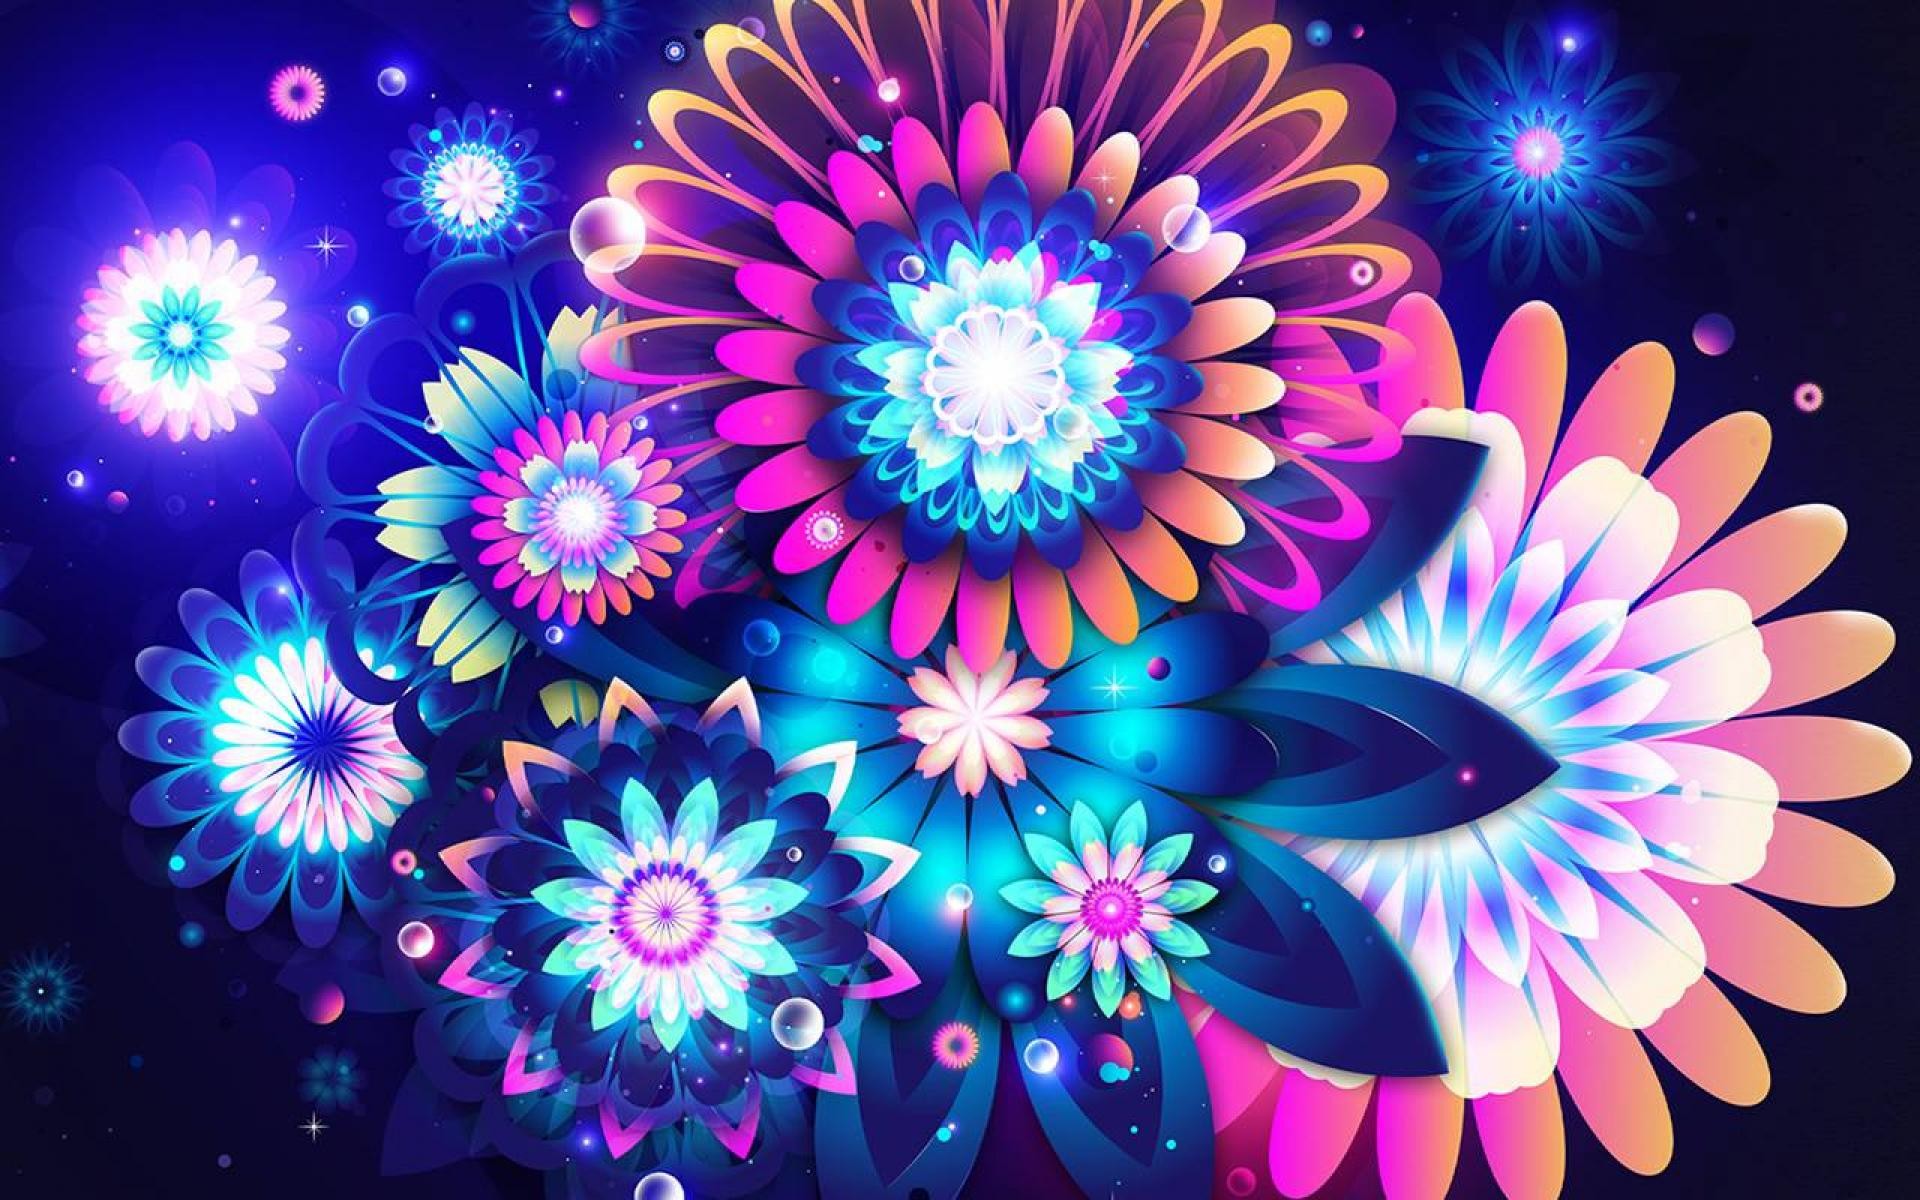 Colorful Background Designs 44 images 